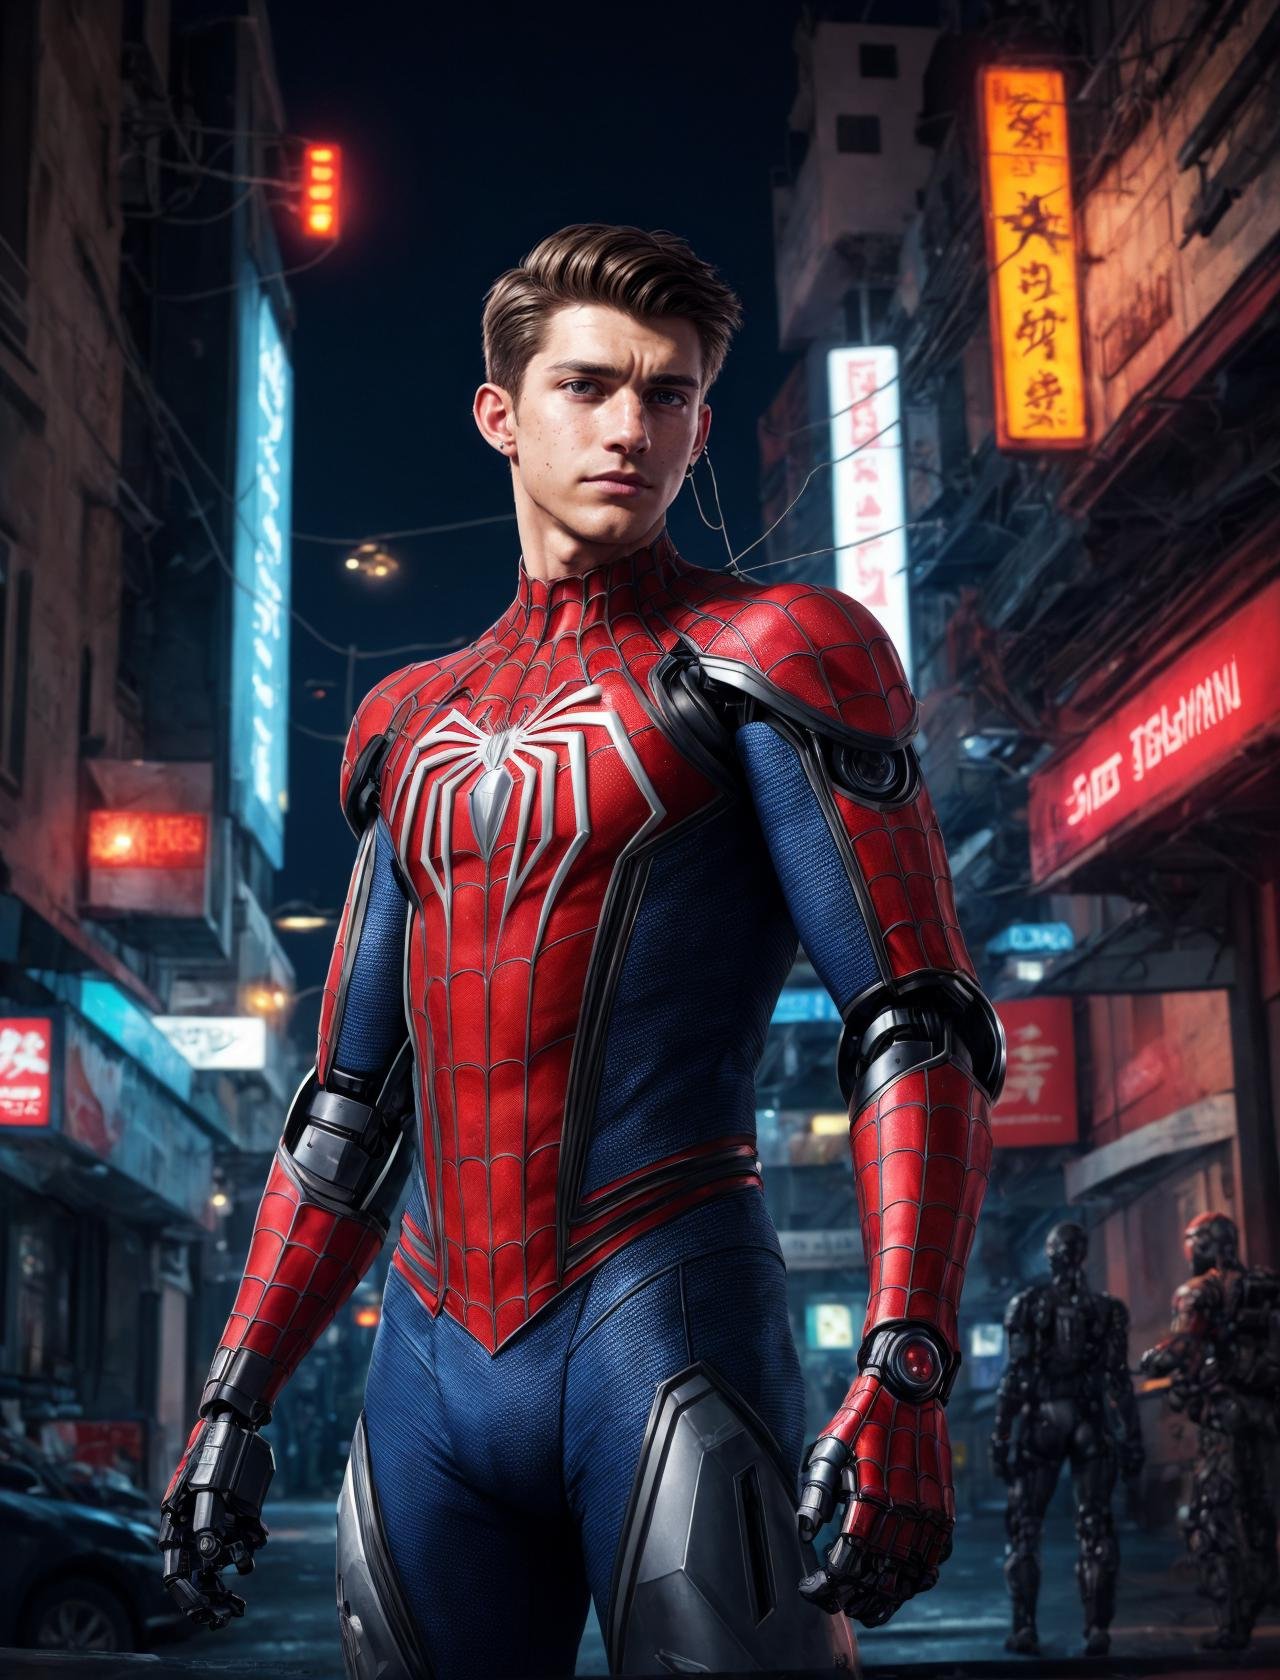 (GS-Masculine:1), (1boy), close up shot, Very detailed young handsome face, heroic, detailed realistic open eyes, vascular, wide shoulders, short midsection, detailed hands, tan glowing skin, freckles, depth of field, dynamic angles, (spiderman), tom holland, andrew  garfield, tobey maguire, (cyberpunk style:1.2), piercings, neo cyberpunk city, plastic vest, light ripped pants, combat gear, police officer, (robotic arms:1.2), robotic hands, neon lights, city street at night, street lights, sci fi world, gadgets, power cells, cybernetics, (best quality:1.2), <lora:more_details:0.5>